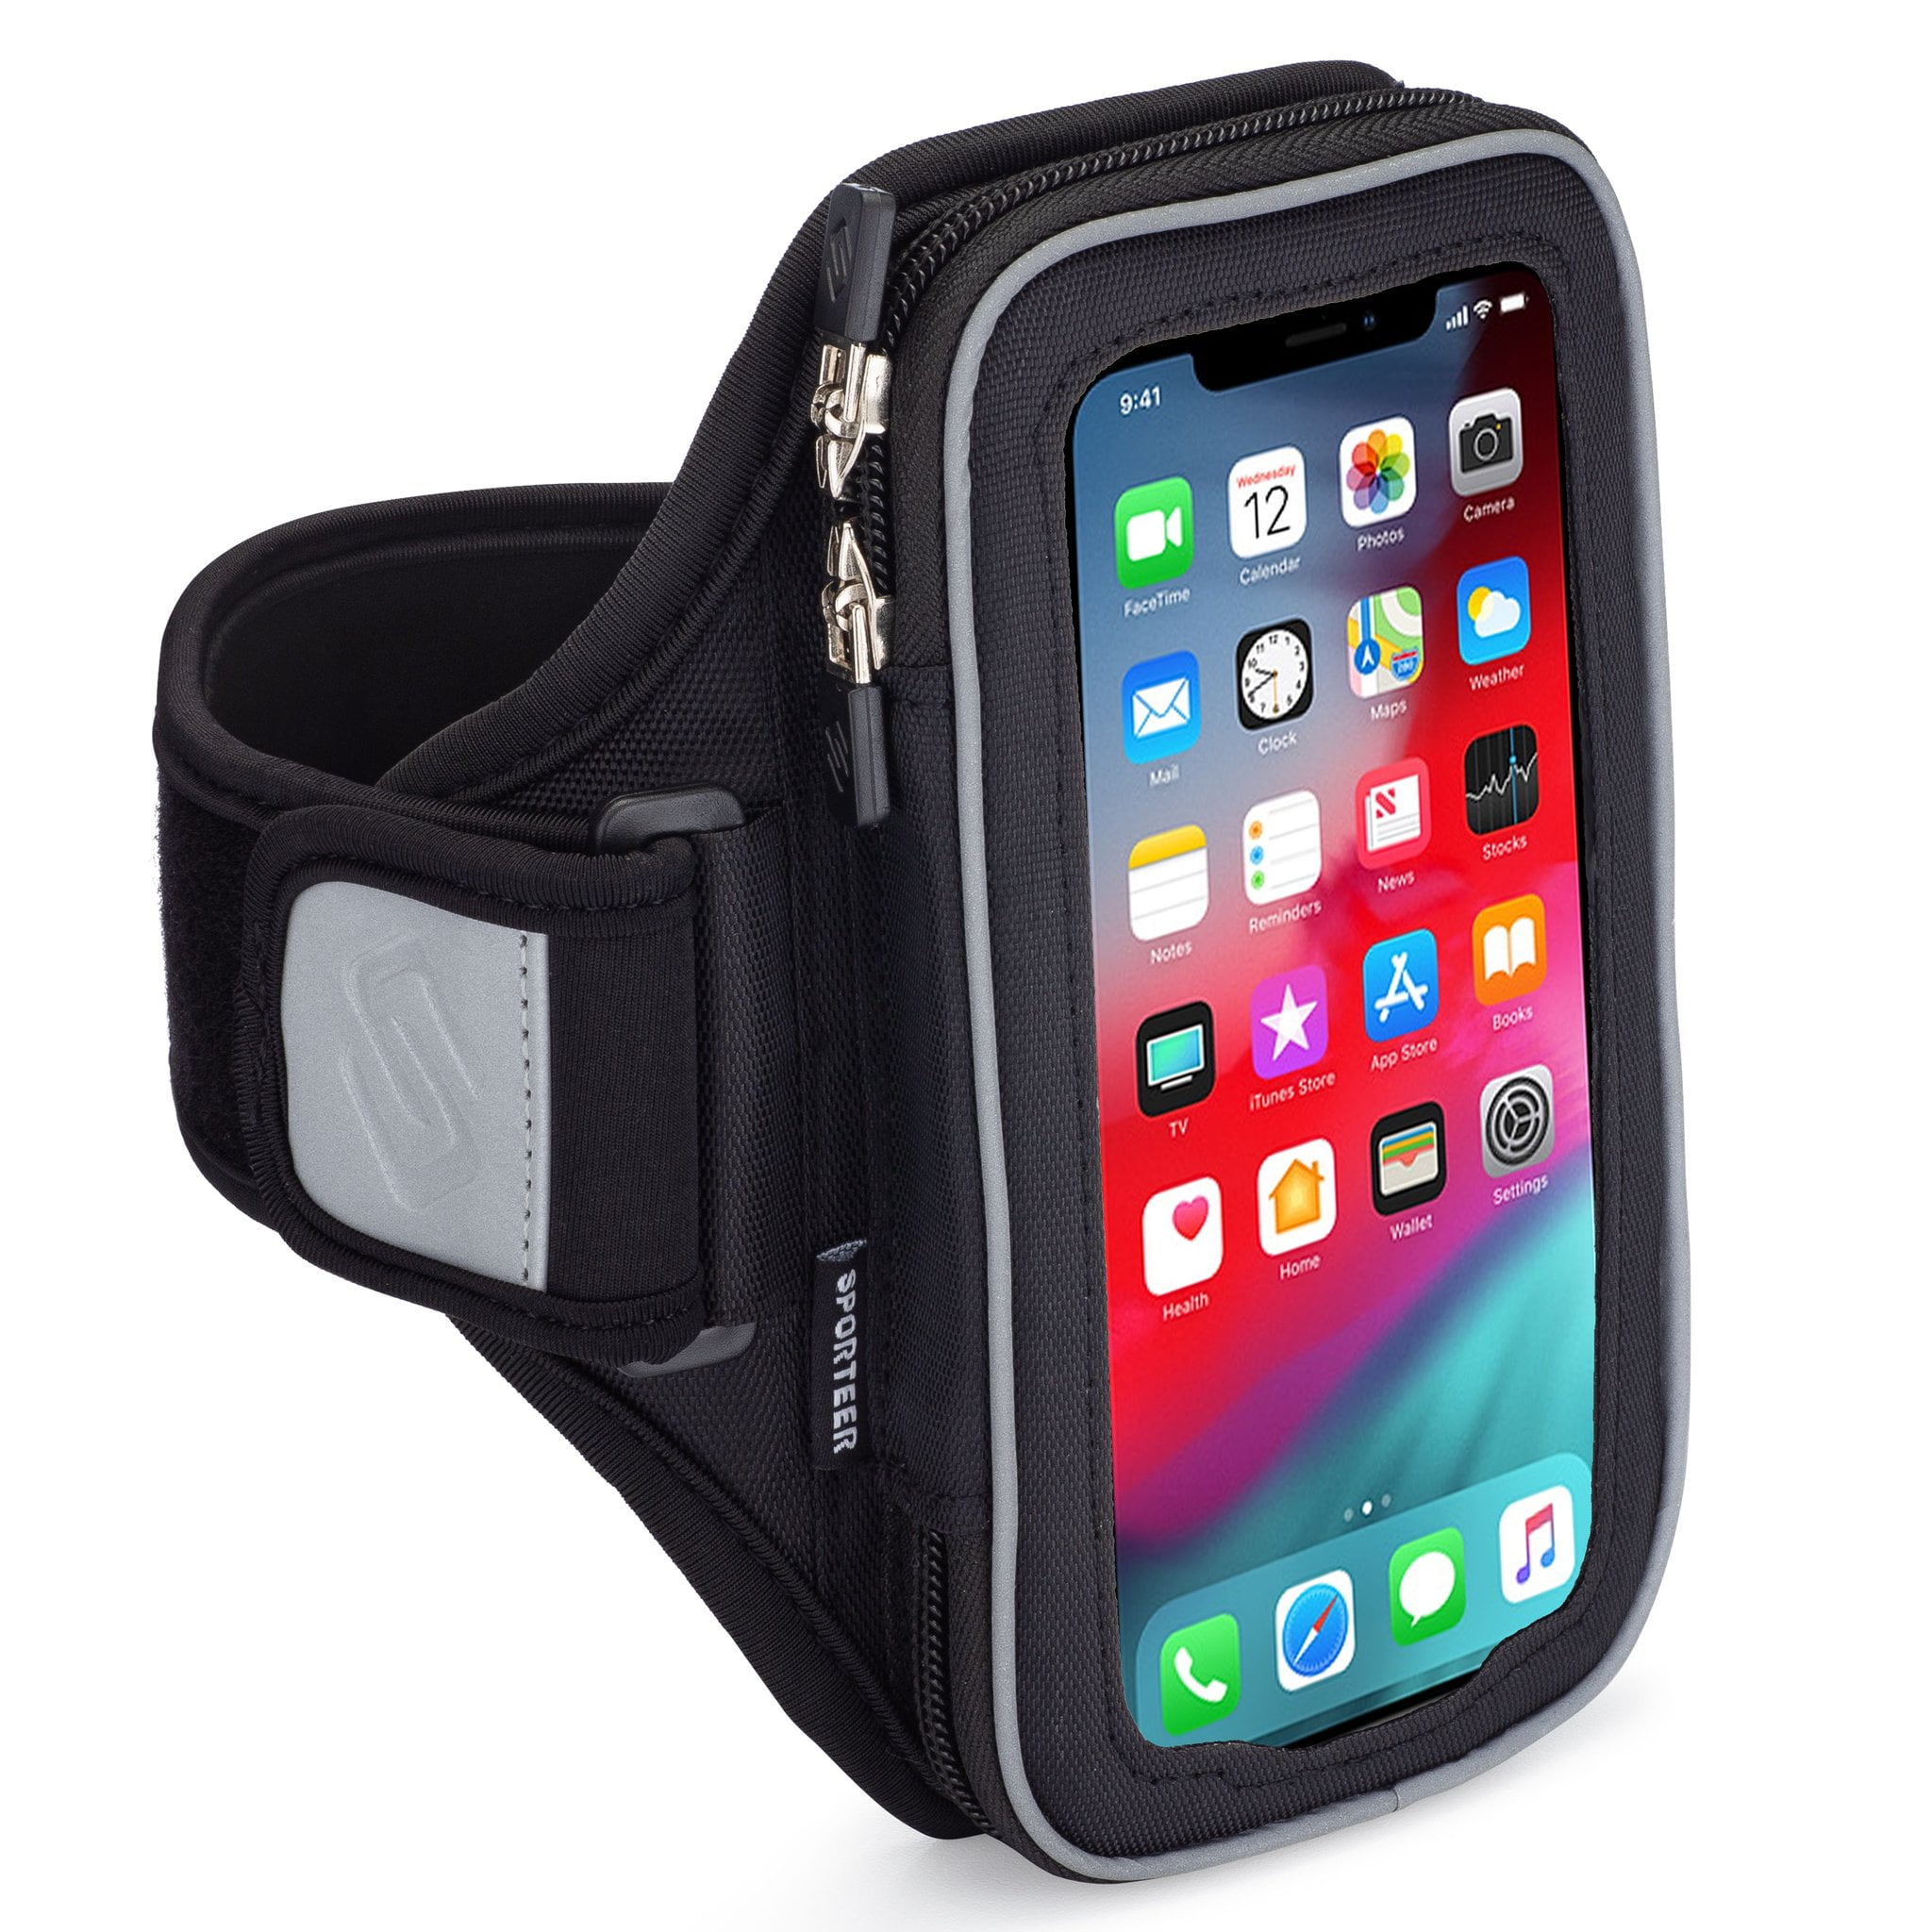 ItBelongs2U for Cell Phone Sport Armband Running Gym Arm Band Pouch Holder Bag Case Pink